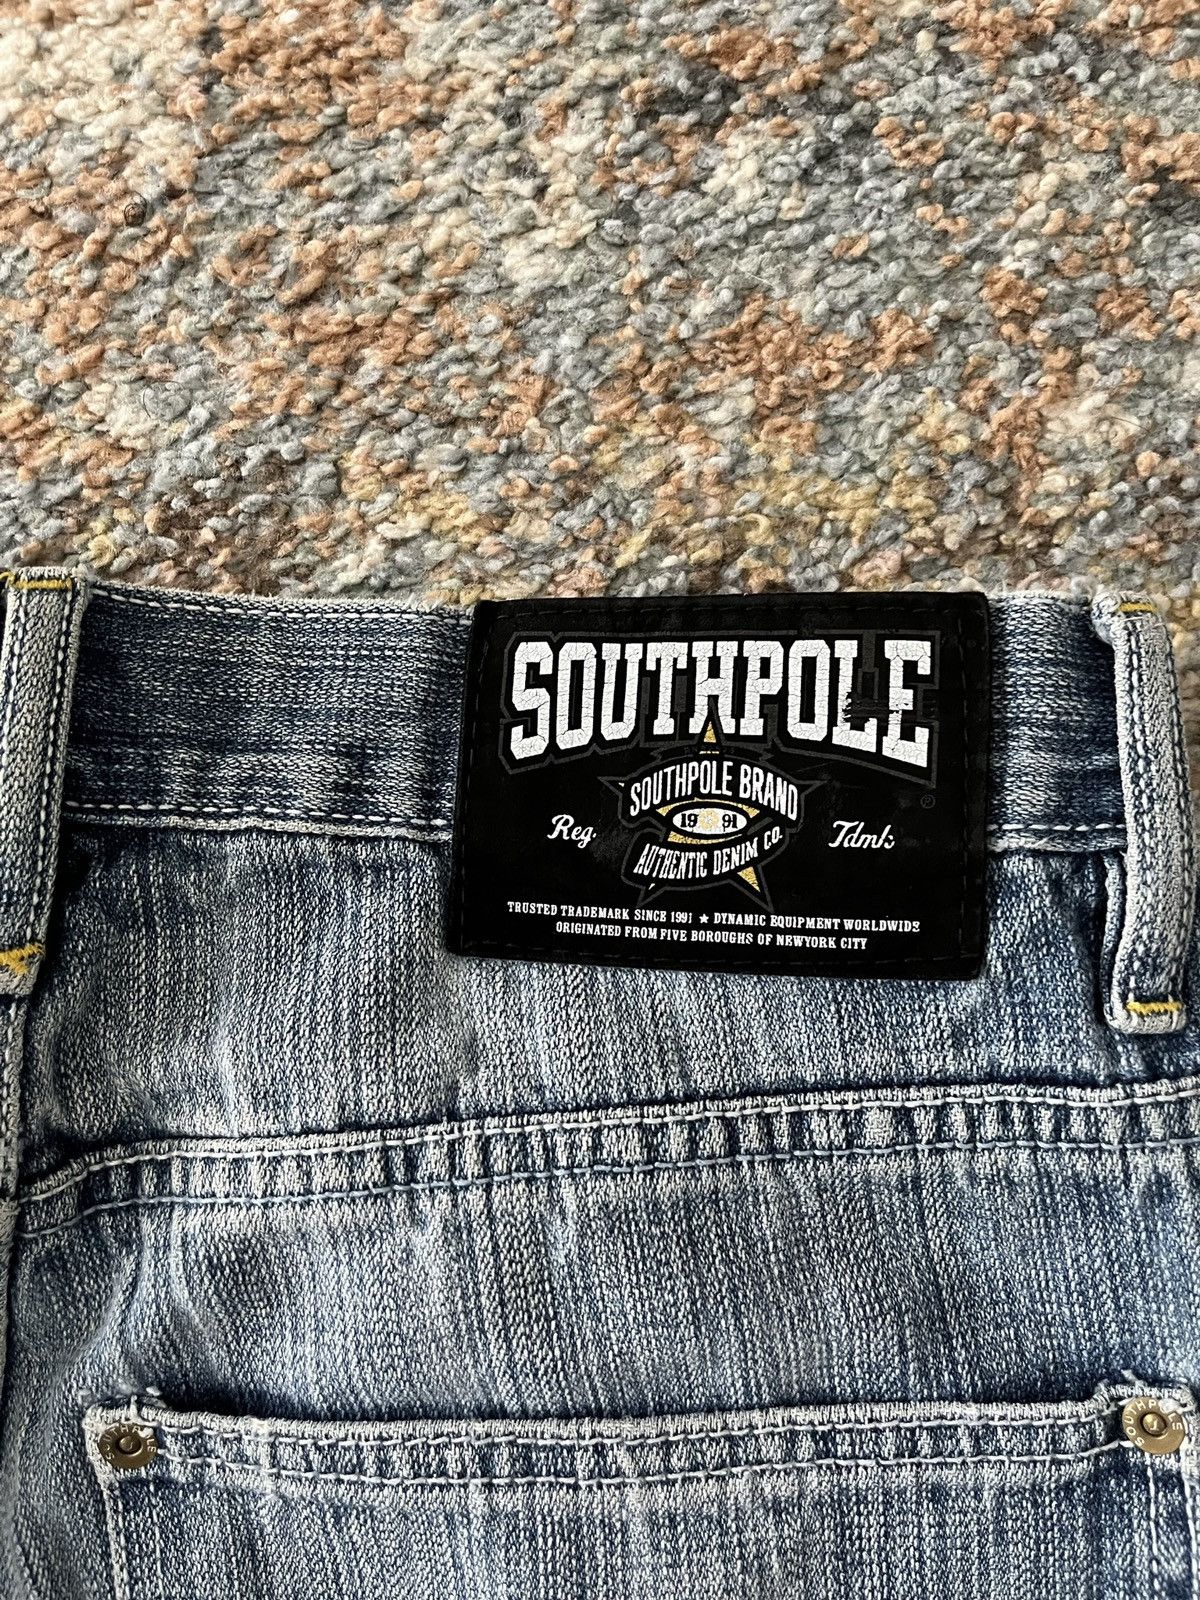 Vintage VTG 90s Southpole Embroidered Jean Shorts 38 Blue Size US 32 / EU 48 - 8 Preview